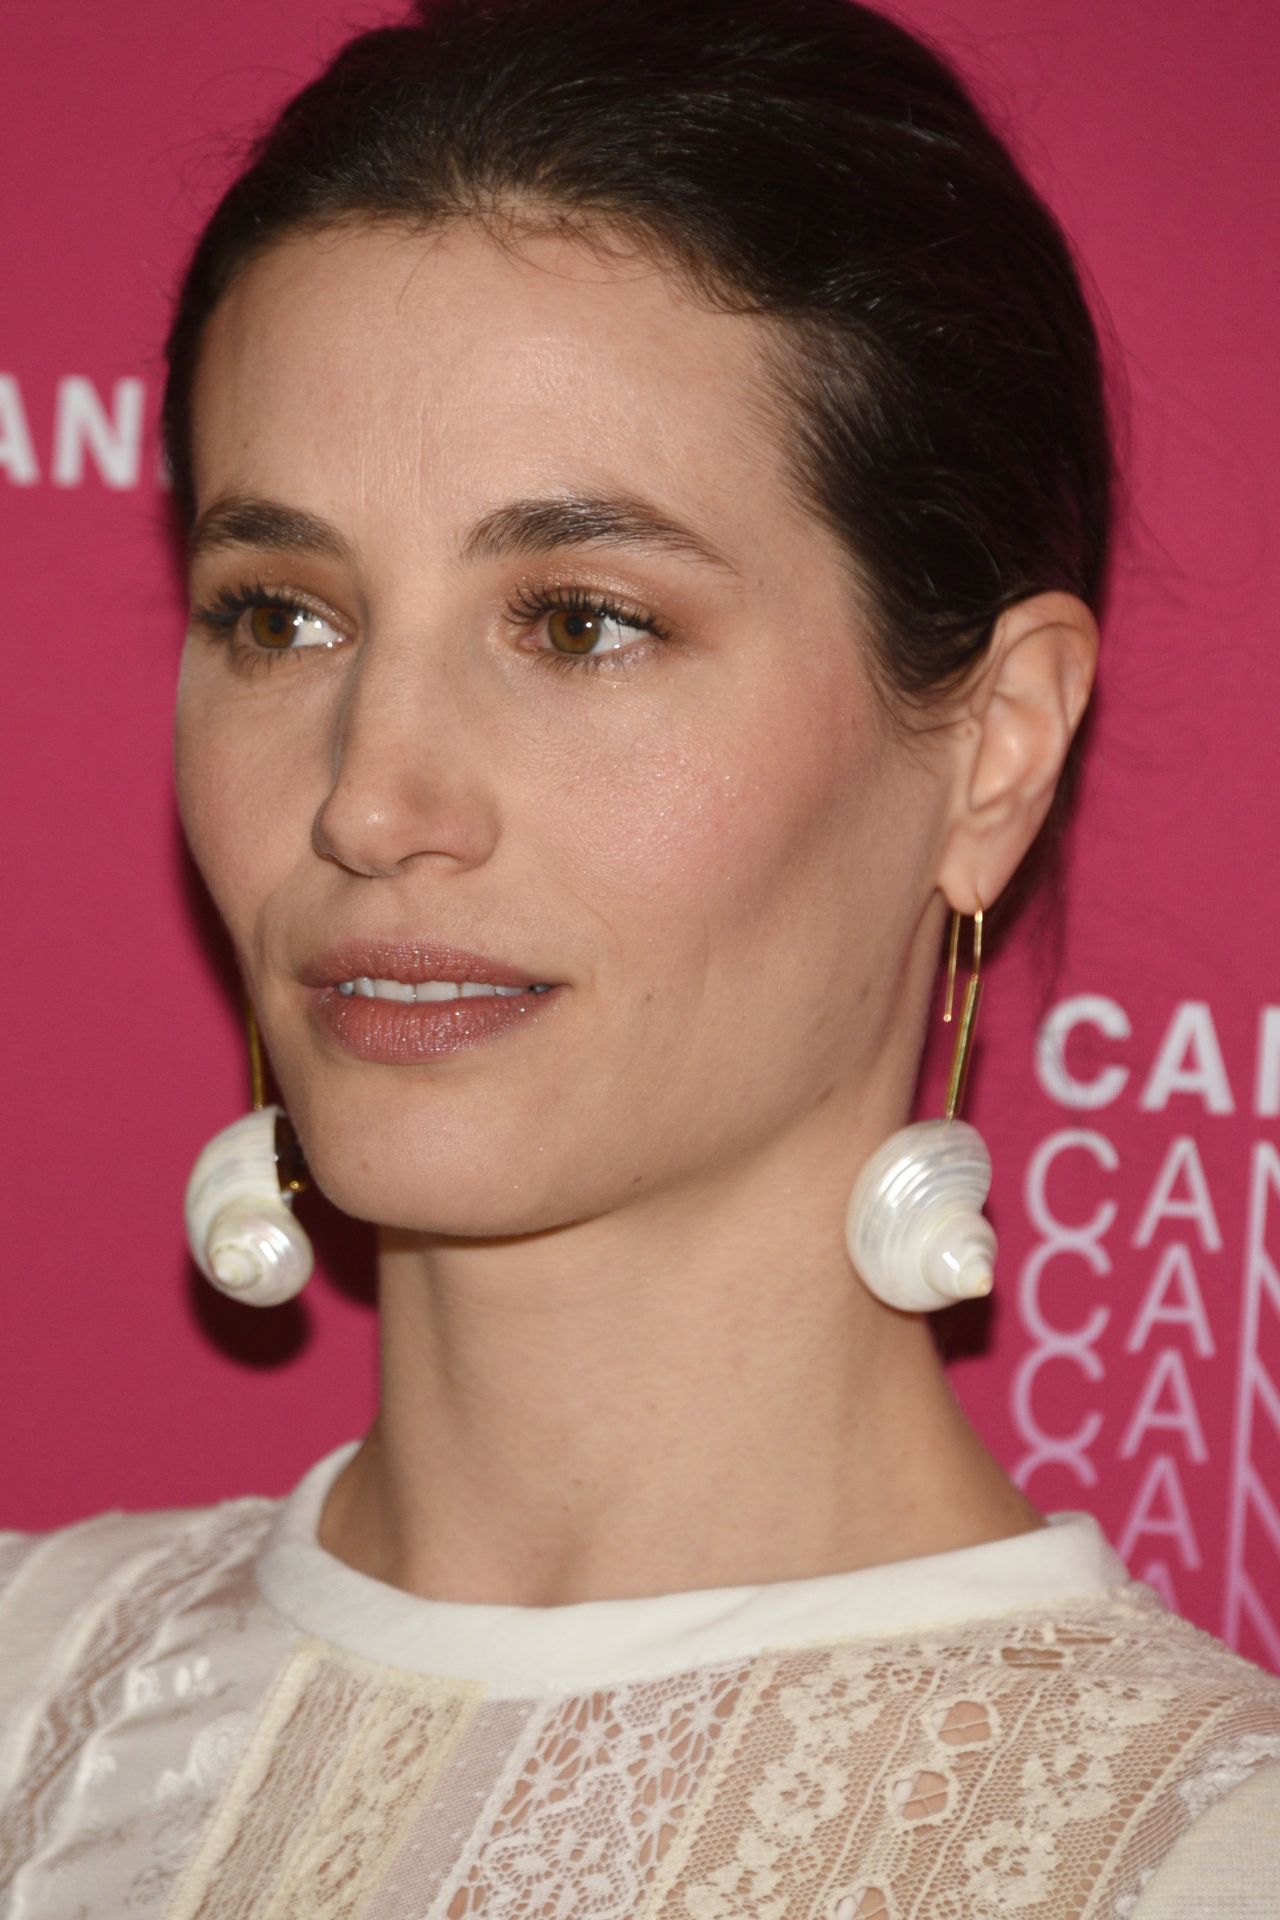 Elisa Lasowski Opening Of The Canneseries Festival And “versailles” Season 3 Premiere In Cannes